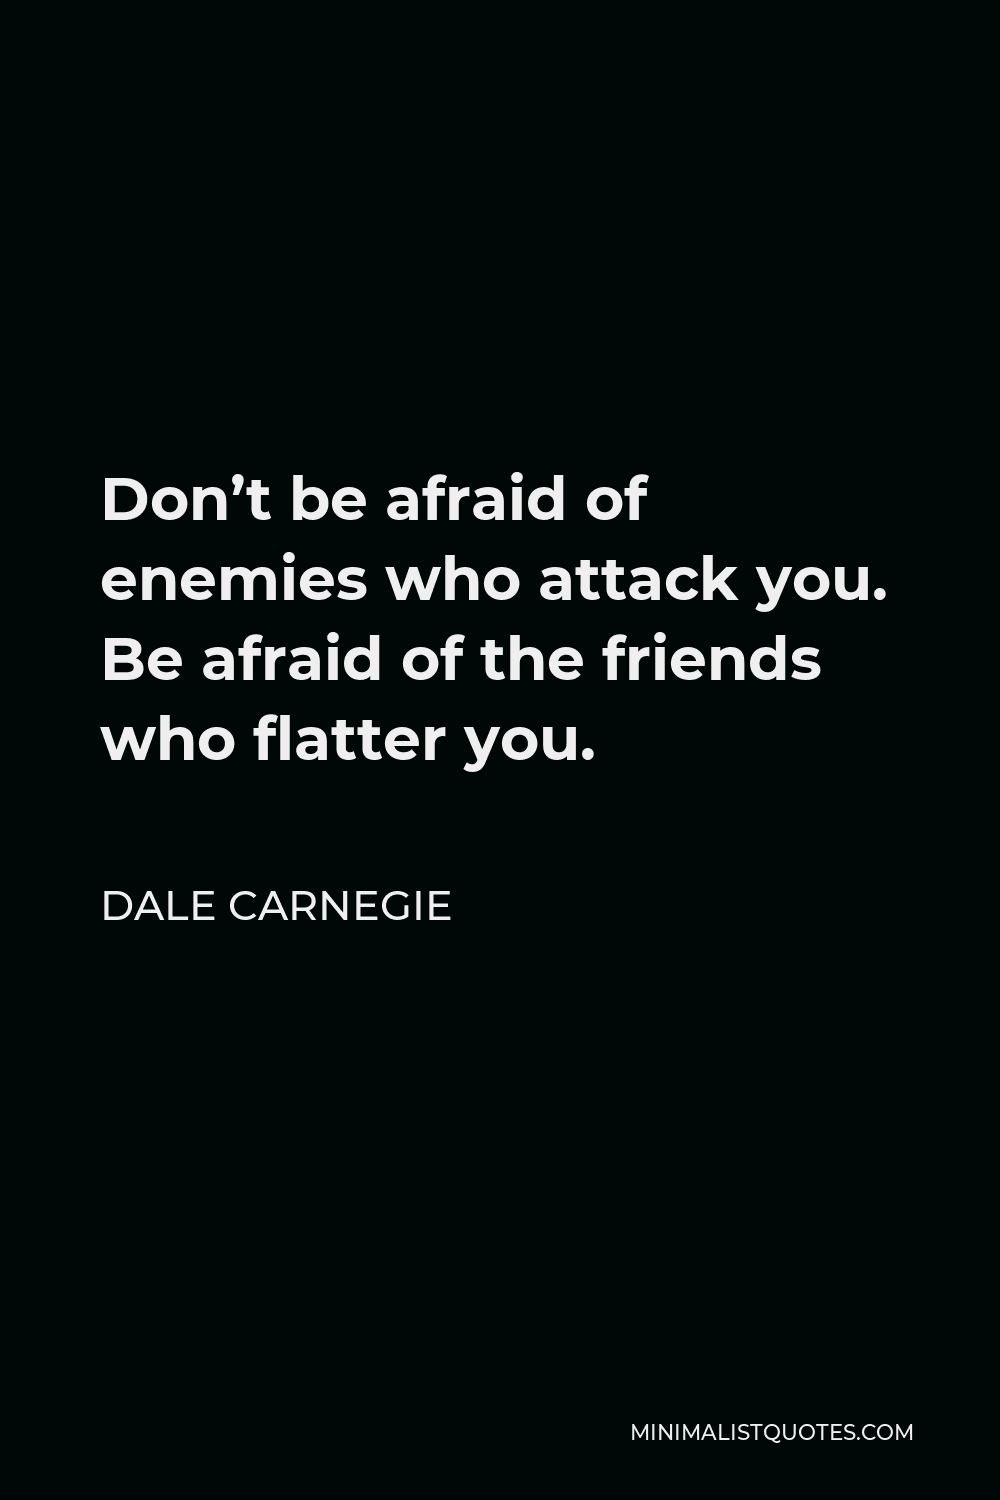 Dale Carnegie Quote - Don’t be afraid of enemies who attack you. Be afraid of the friends who flatter you.